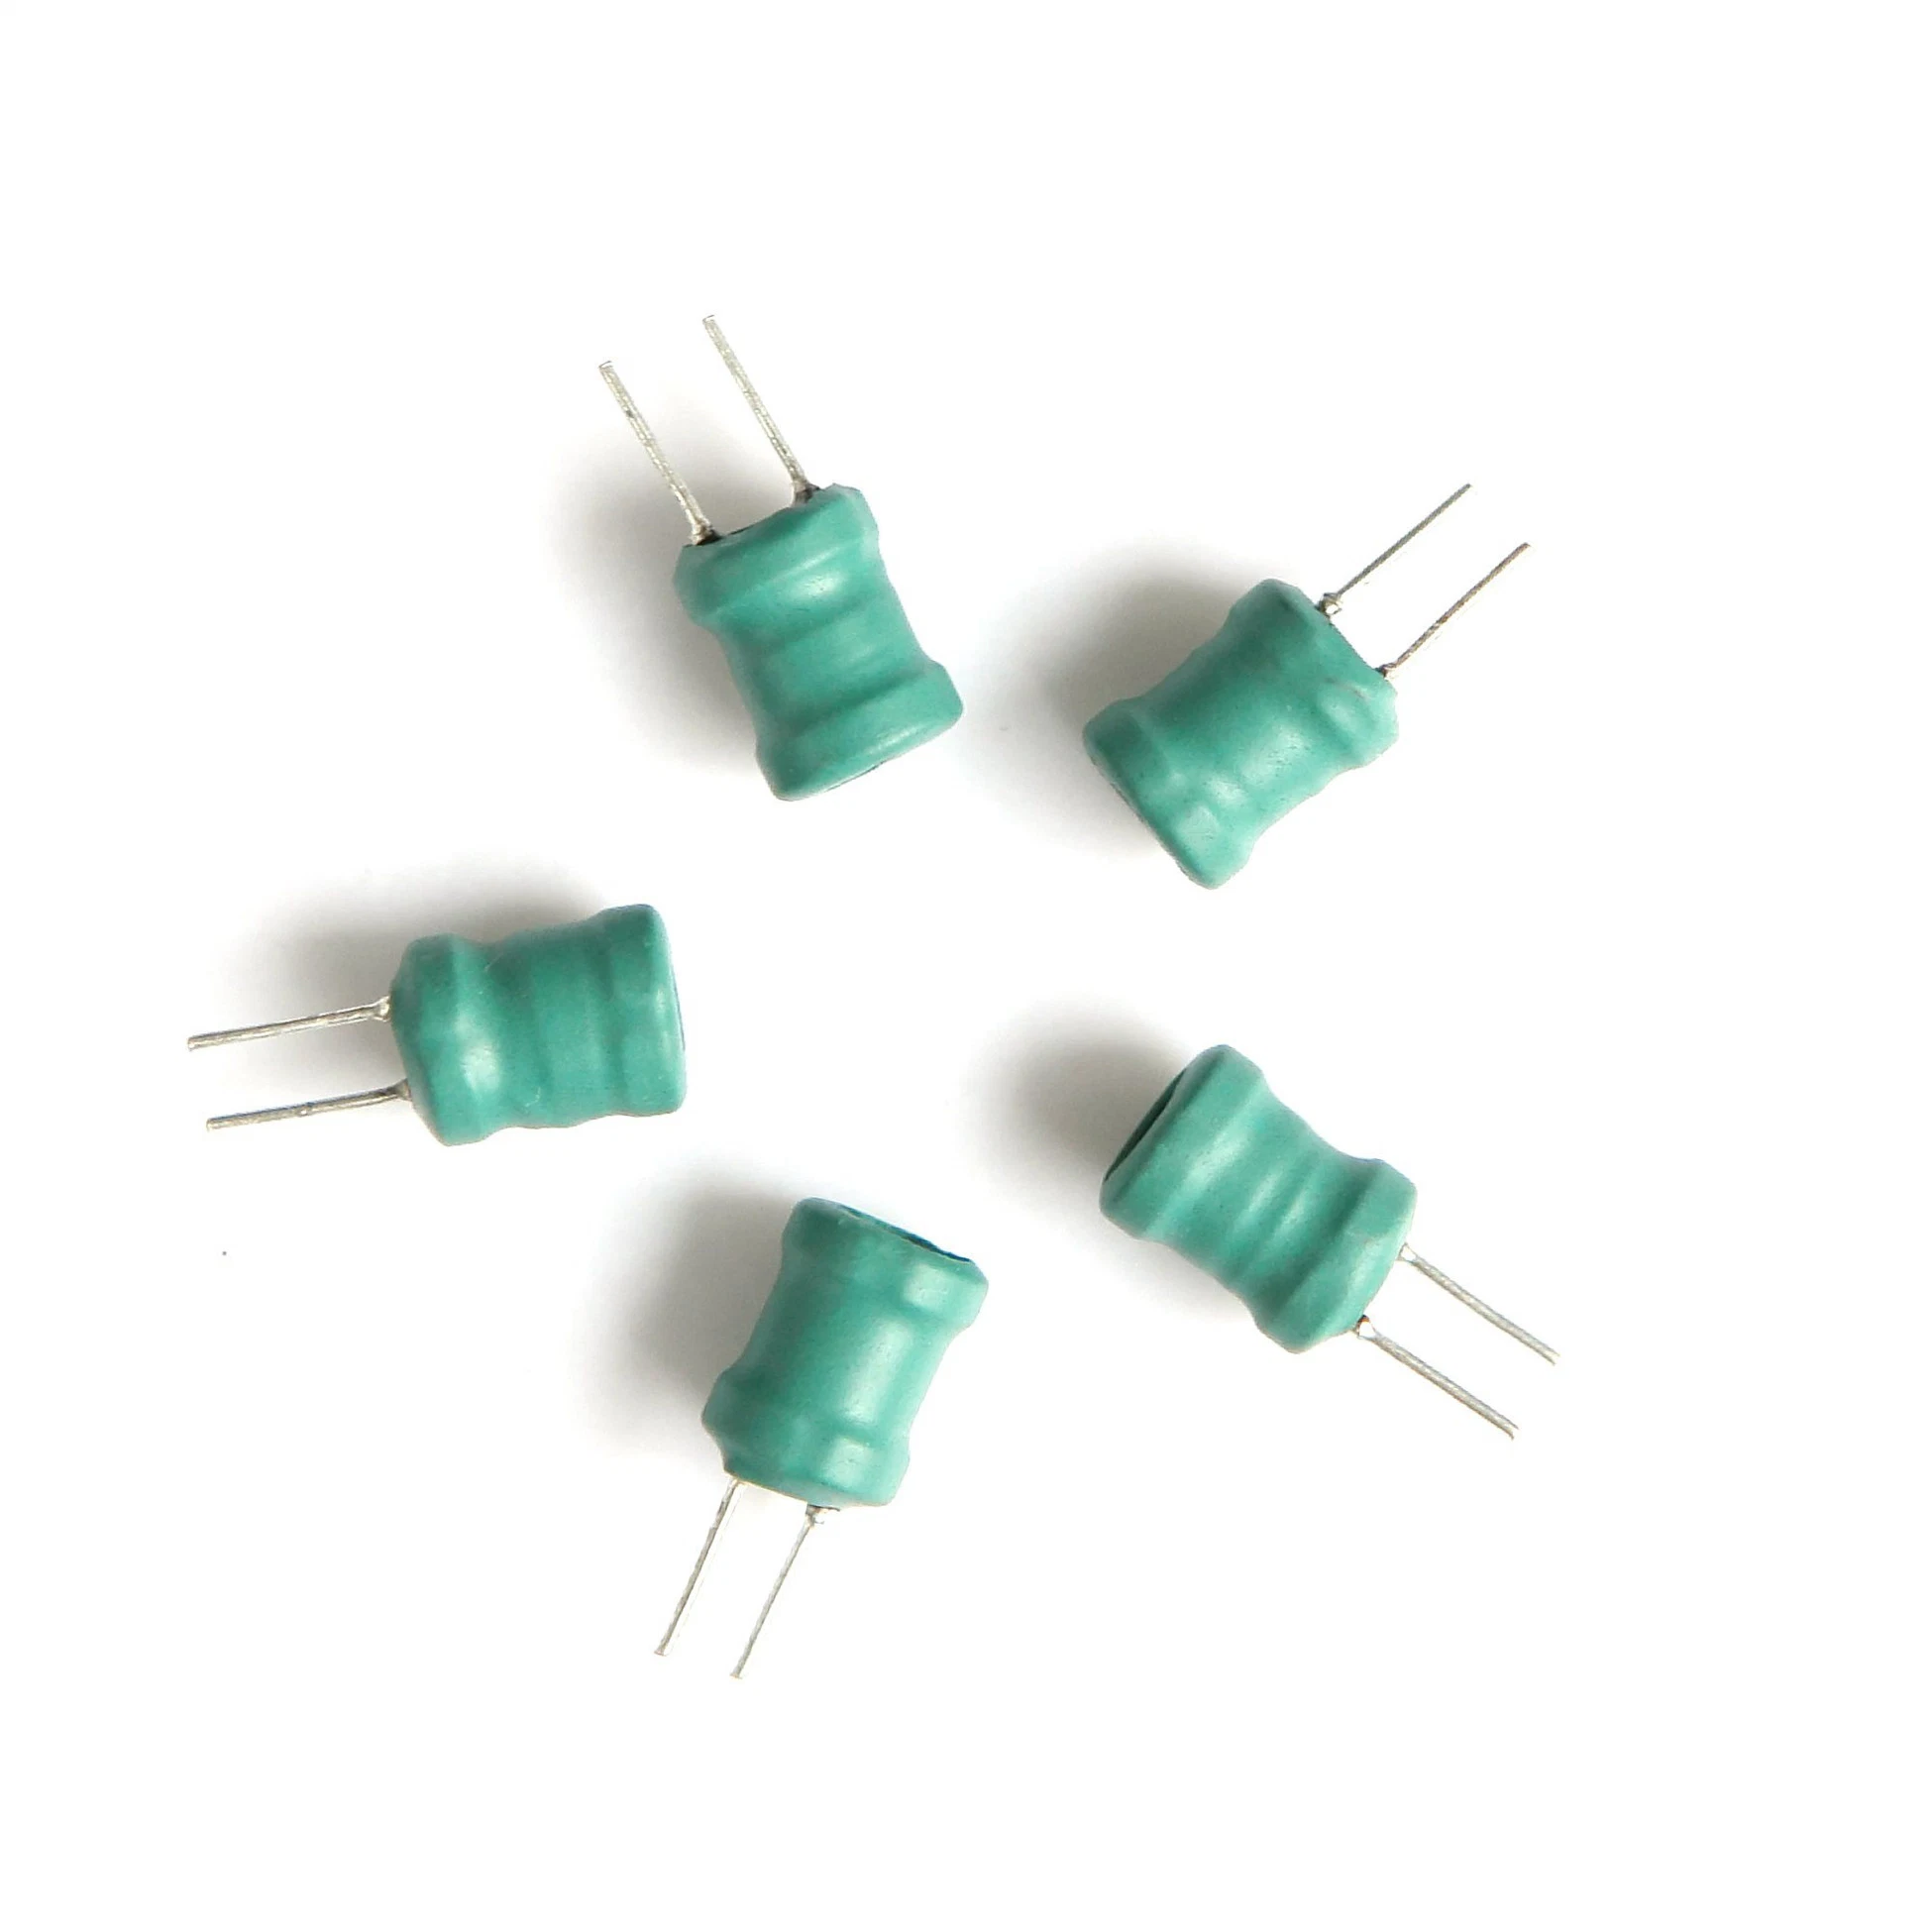 Divider Special Wire SMD Power Inductor Copper Choke Toroidal Coil